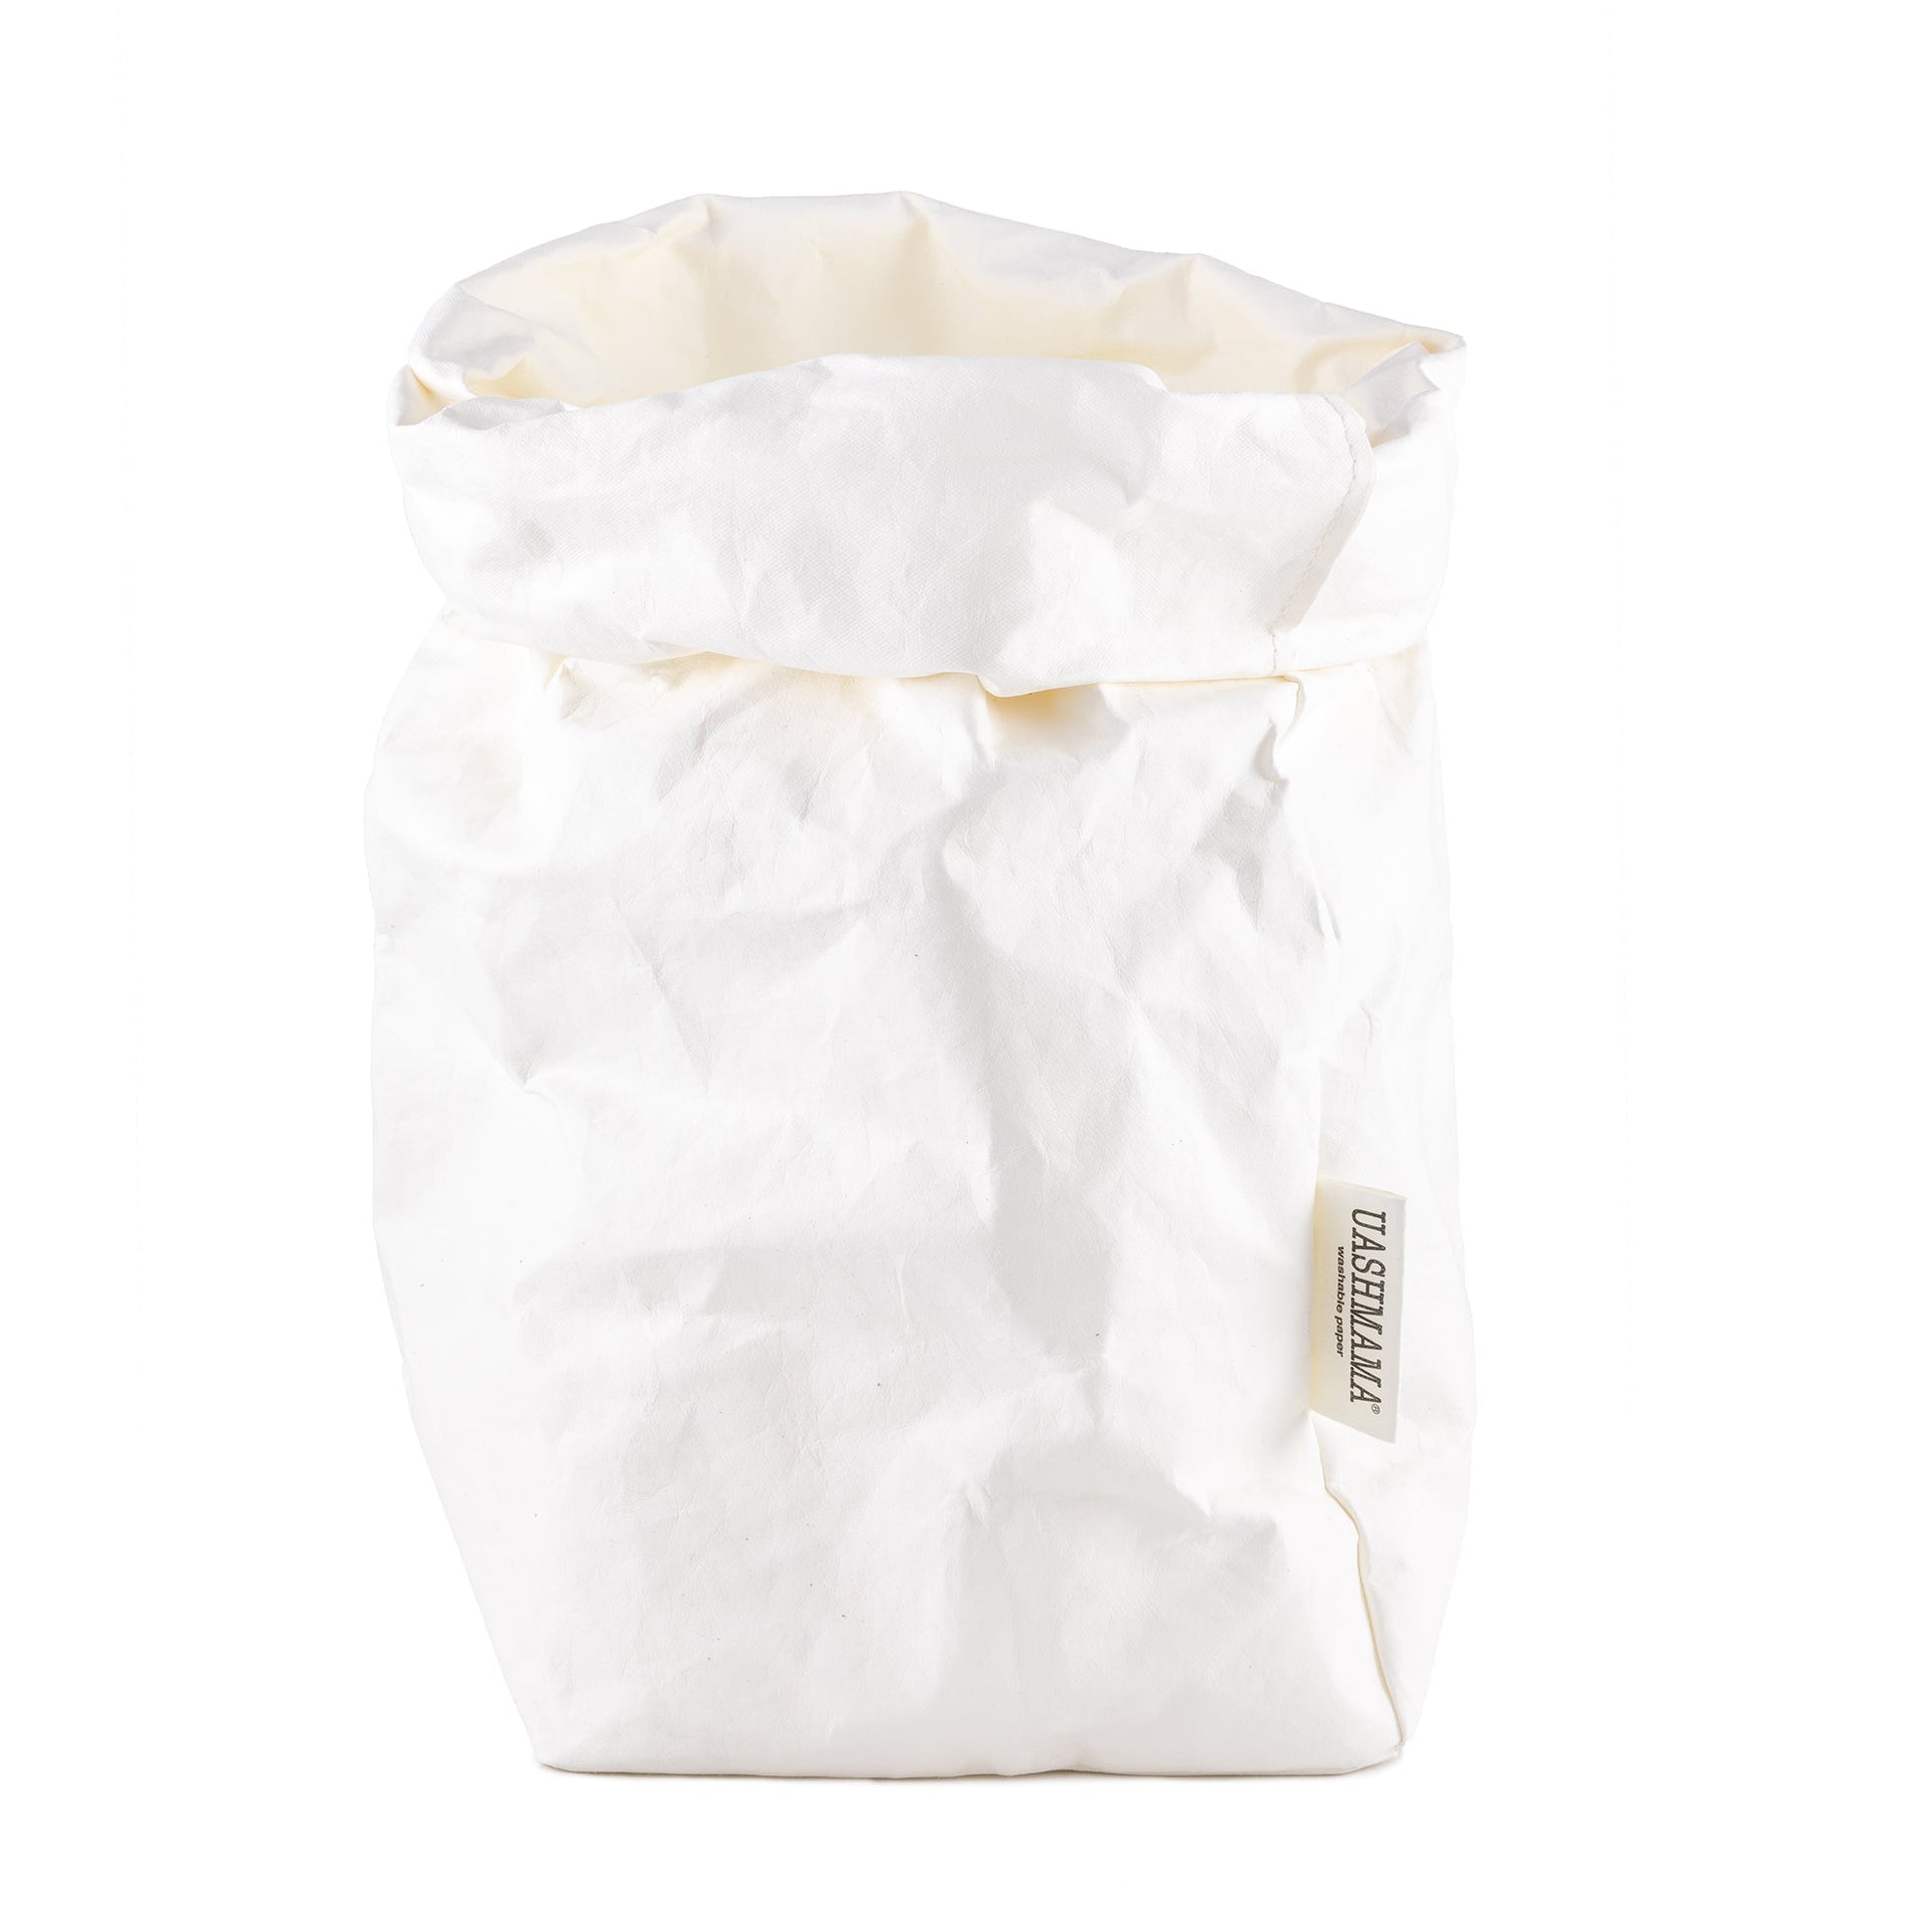 A washable paper bag is shown. The bag is rolled down at the top and features a UASHMAMA logo label on the bottom left corner. The bag pictured is the extra large size in white.